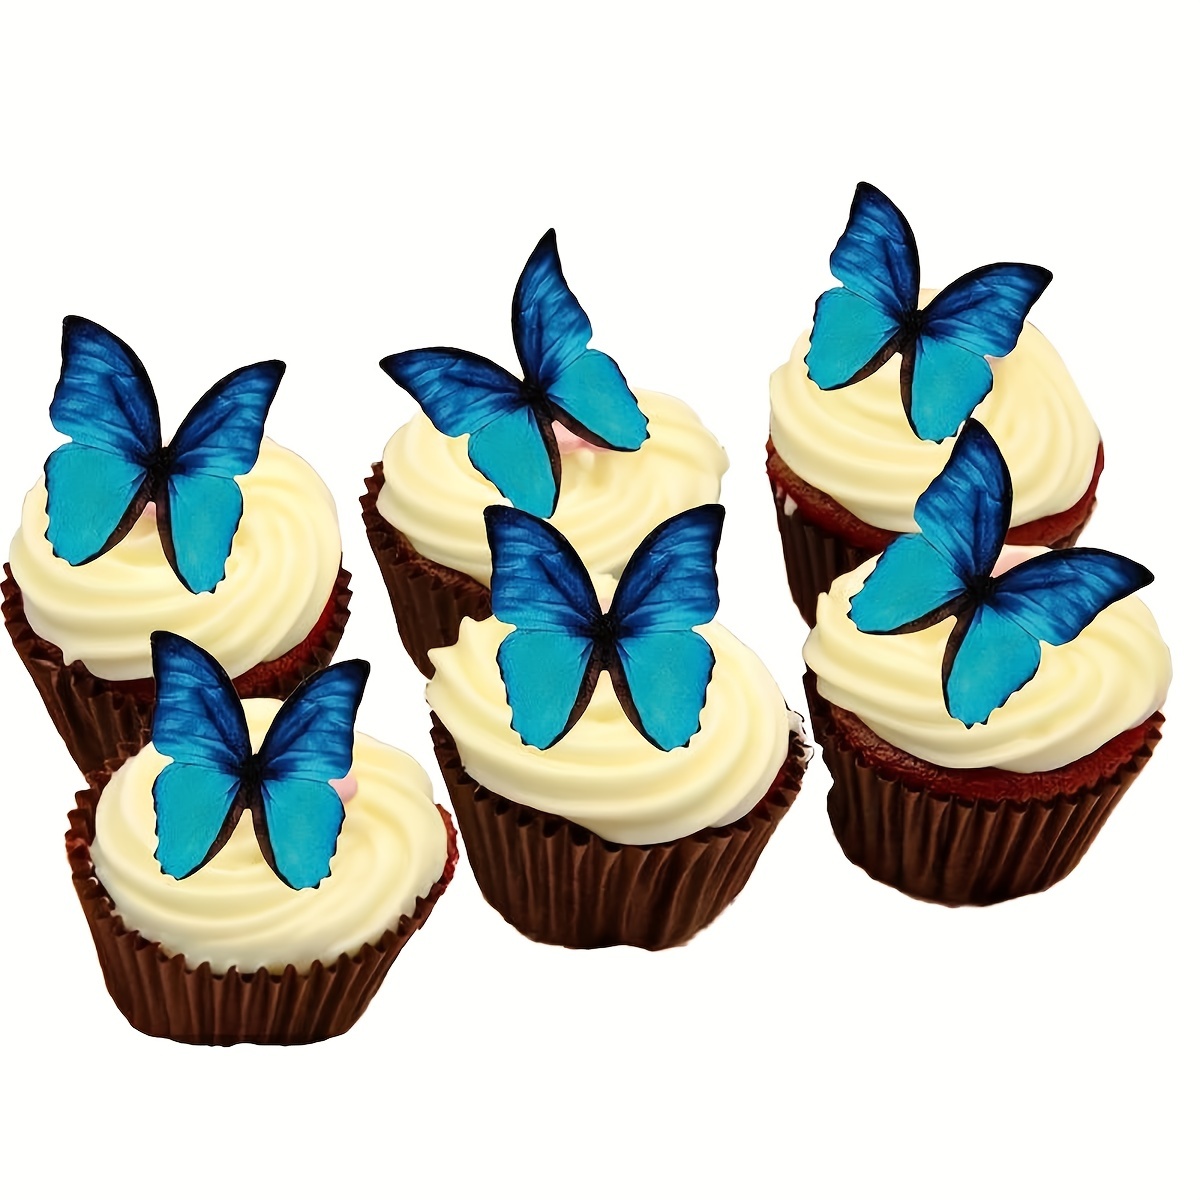 50 Pcs Butterfly Decorations Edible Cake Decorations Butterfly Cupcake Toppers Edible Wedding Cake Birthday Party Food Decoration Mixed Size & Colour